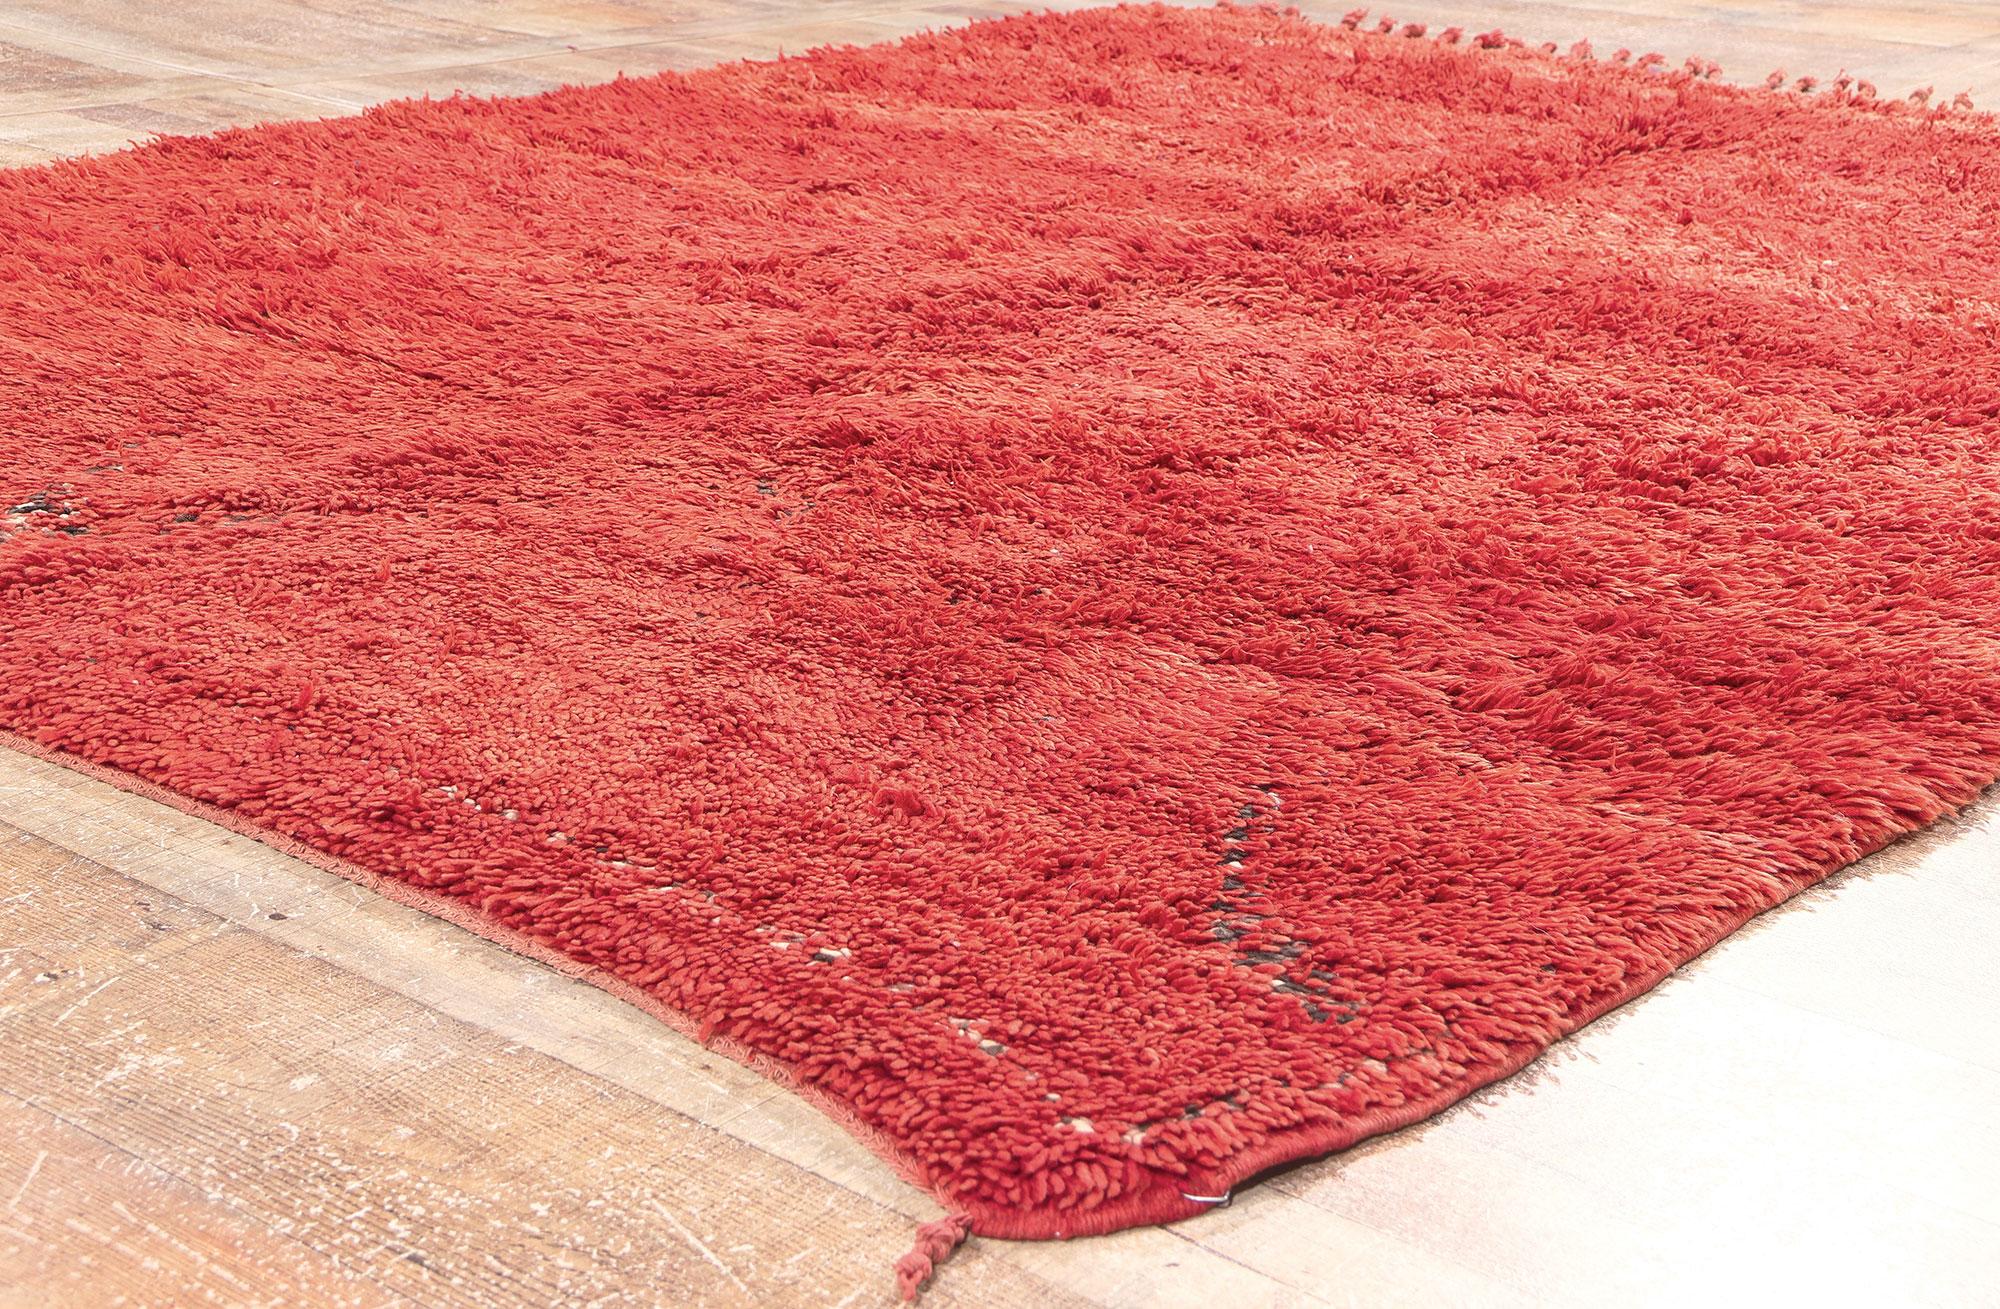 Vintage Red Beni MGuild Rug with Hidden Pattern, Midcentury Meets Cozy Nomad For Sale 1